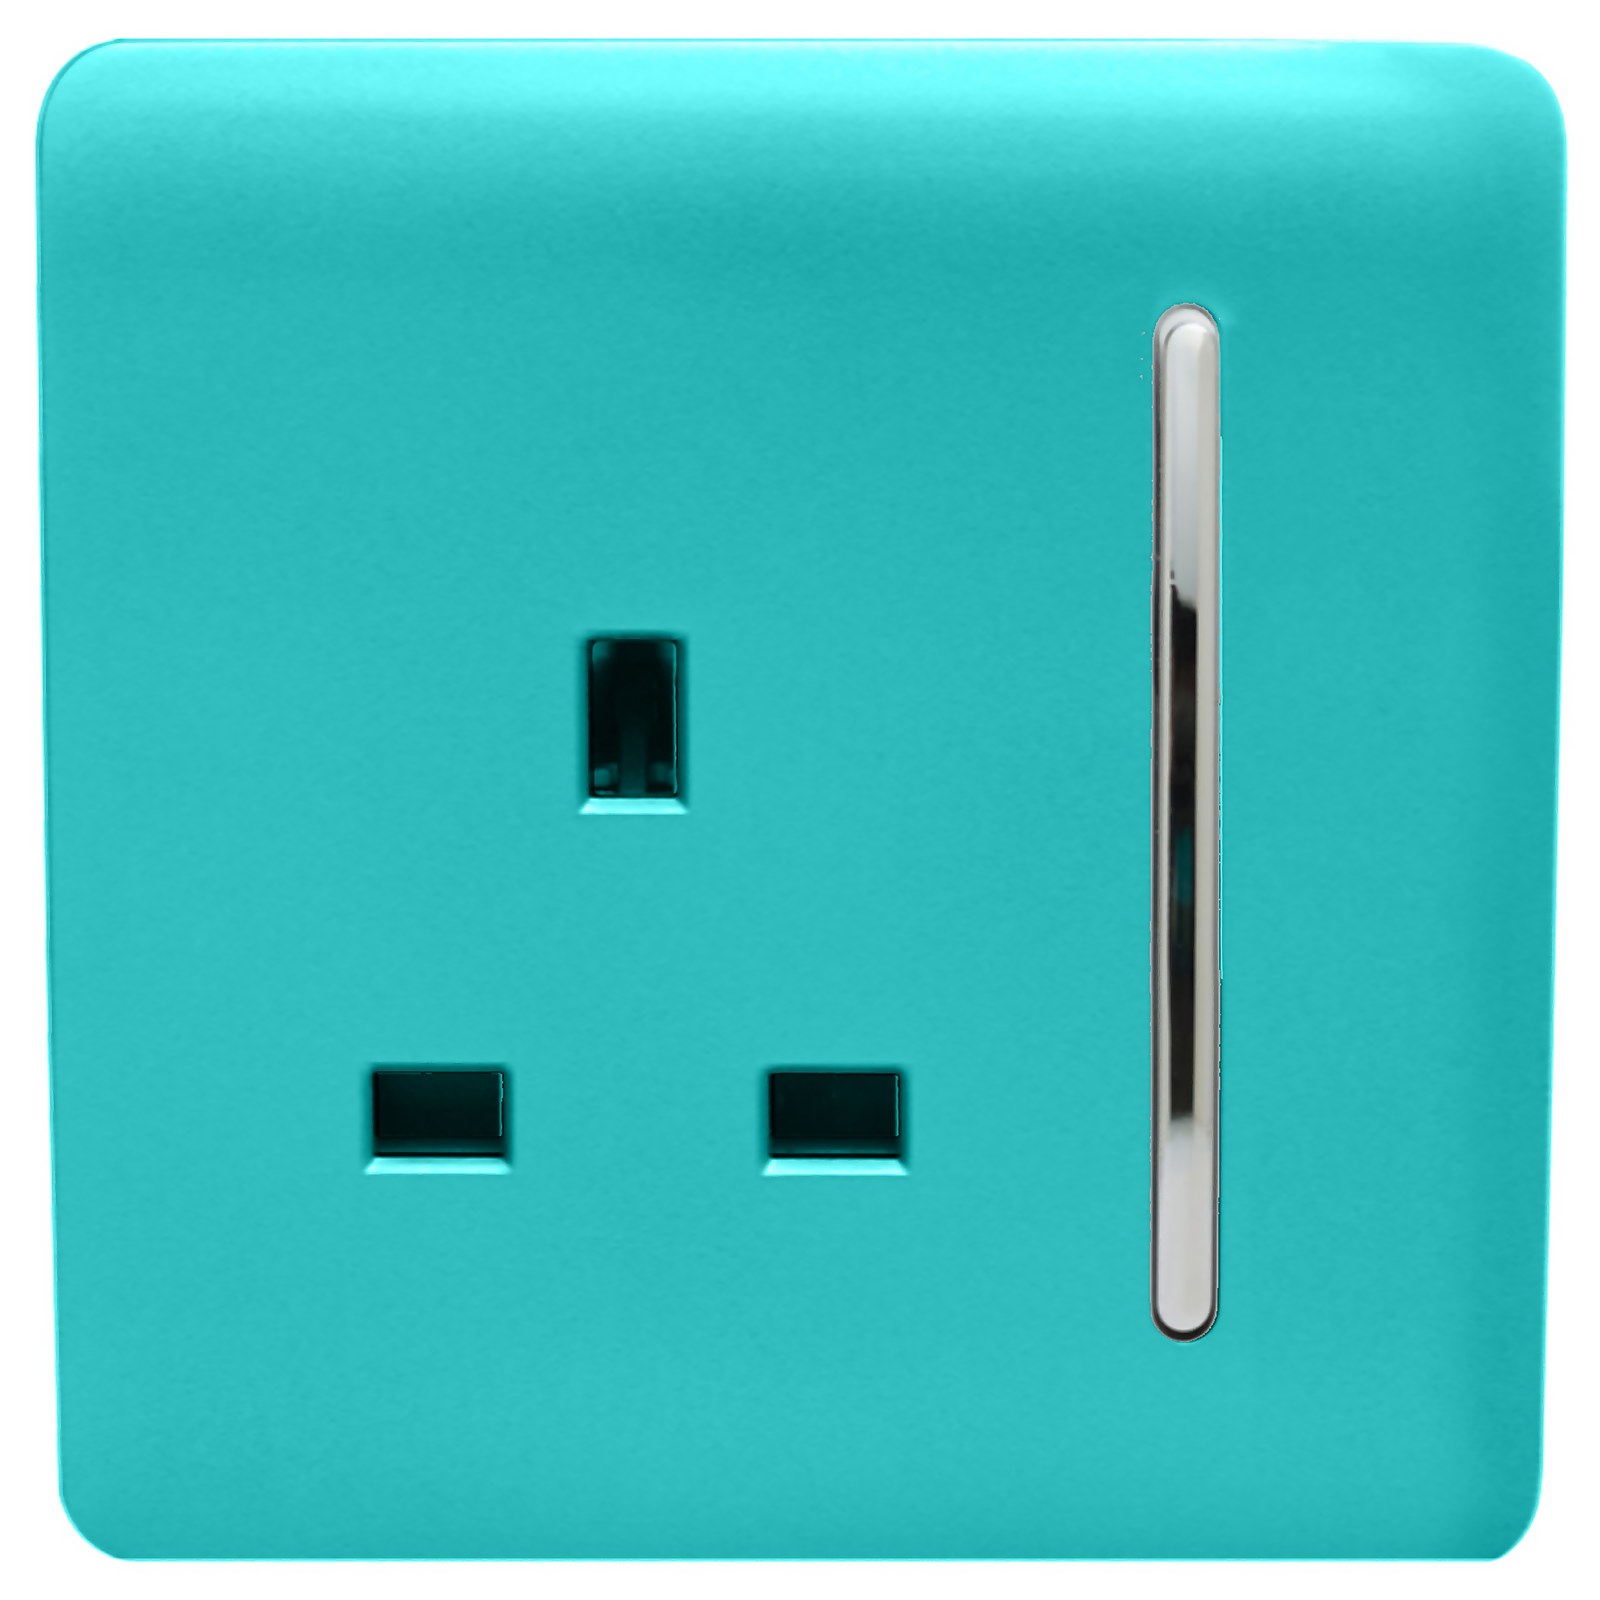 Photo of Trendi Switch 1 Gang 13amp Switched Socket In Bright Teal